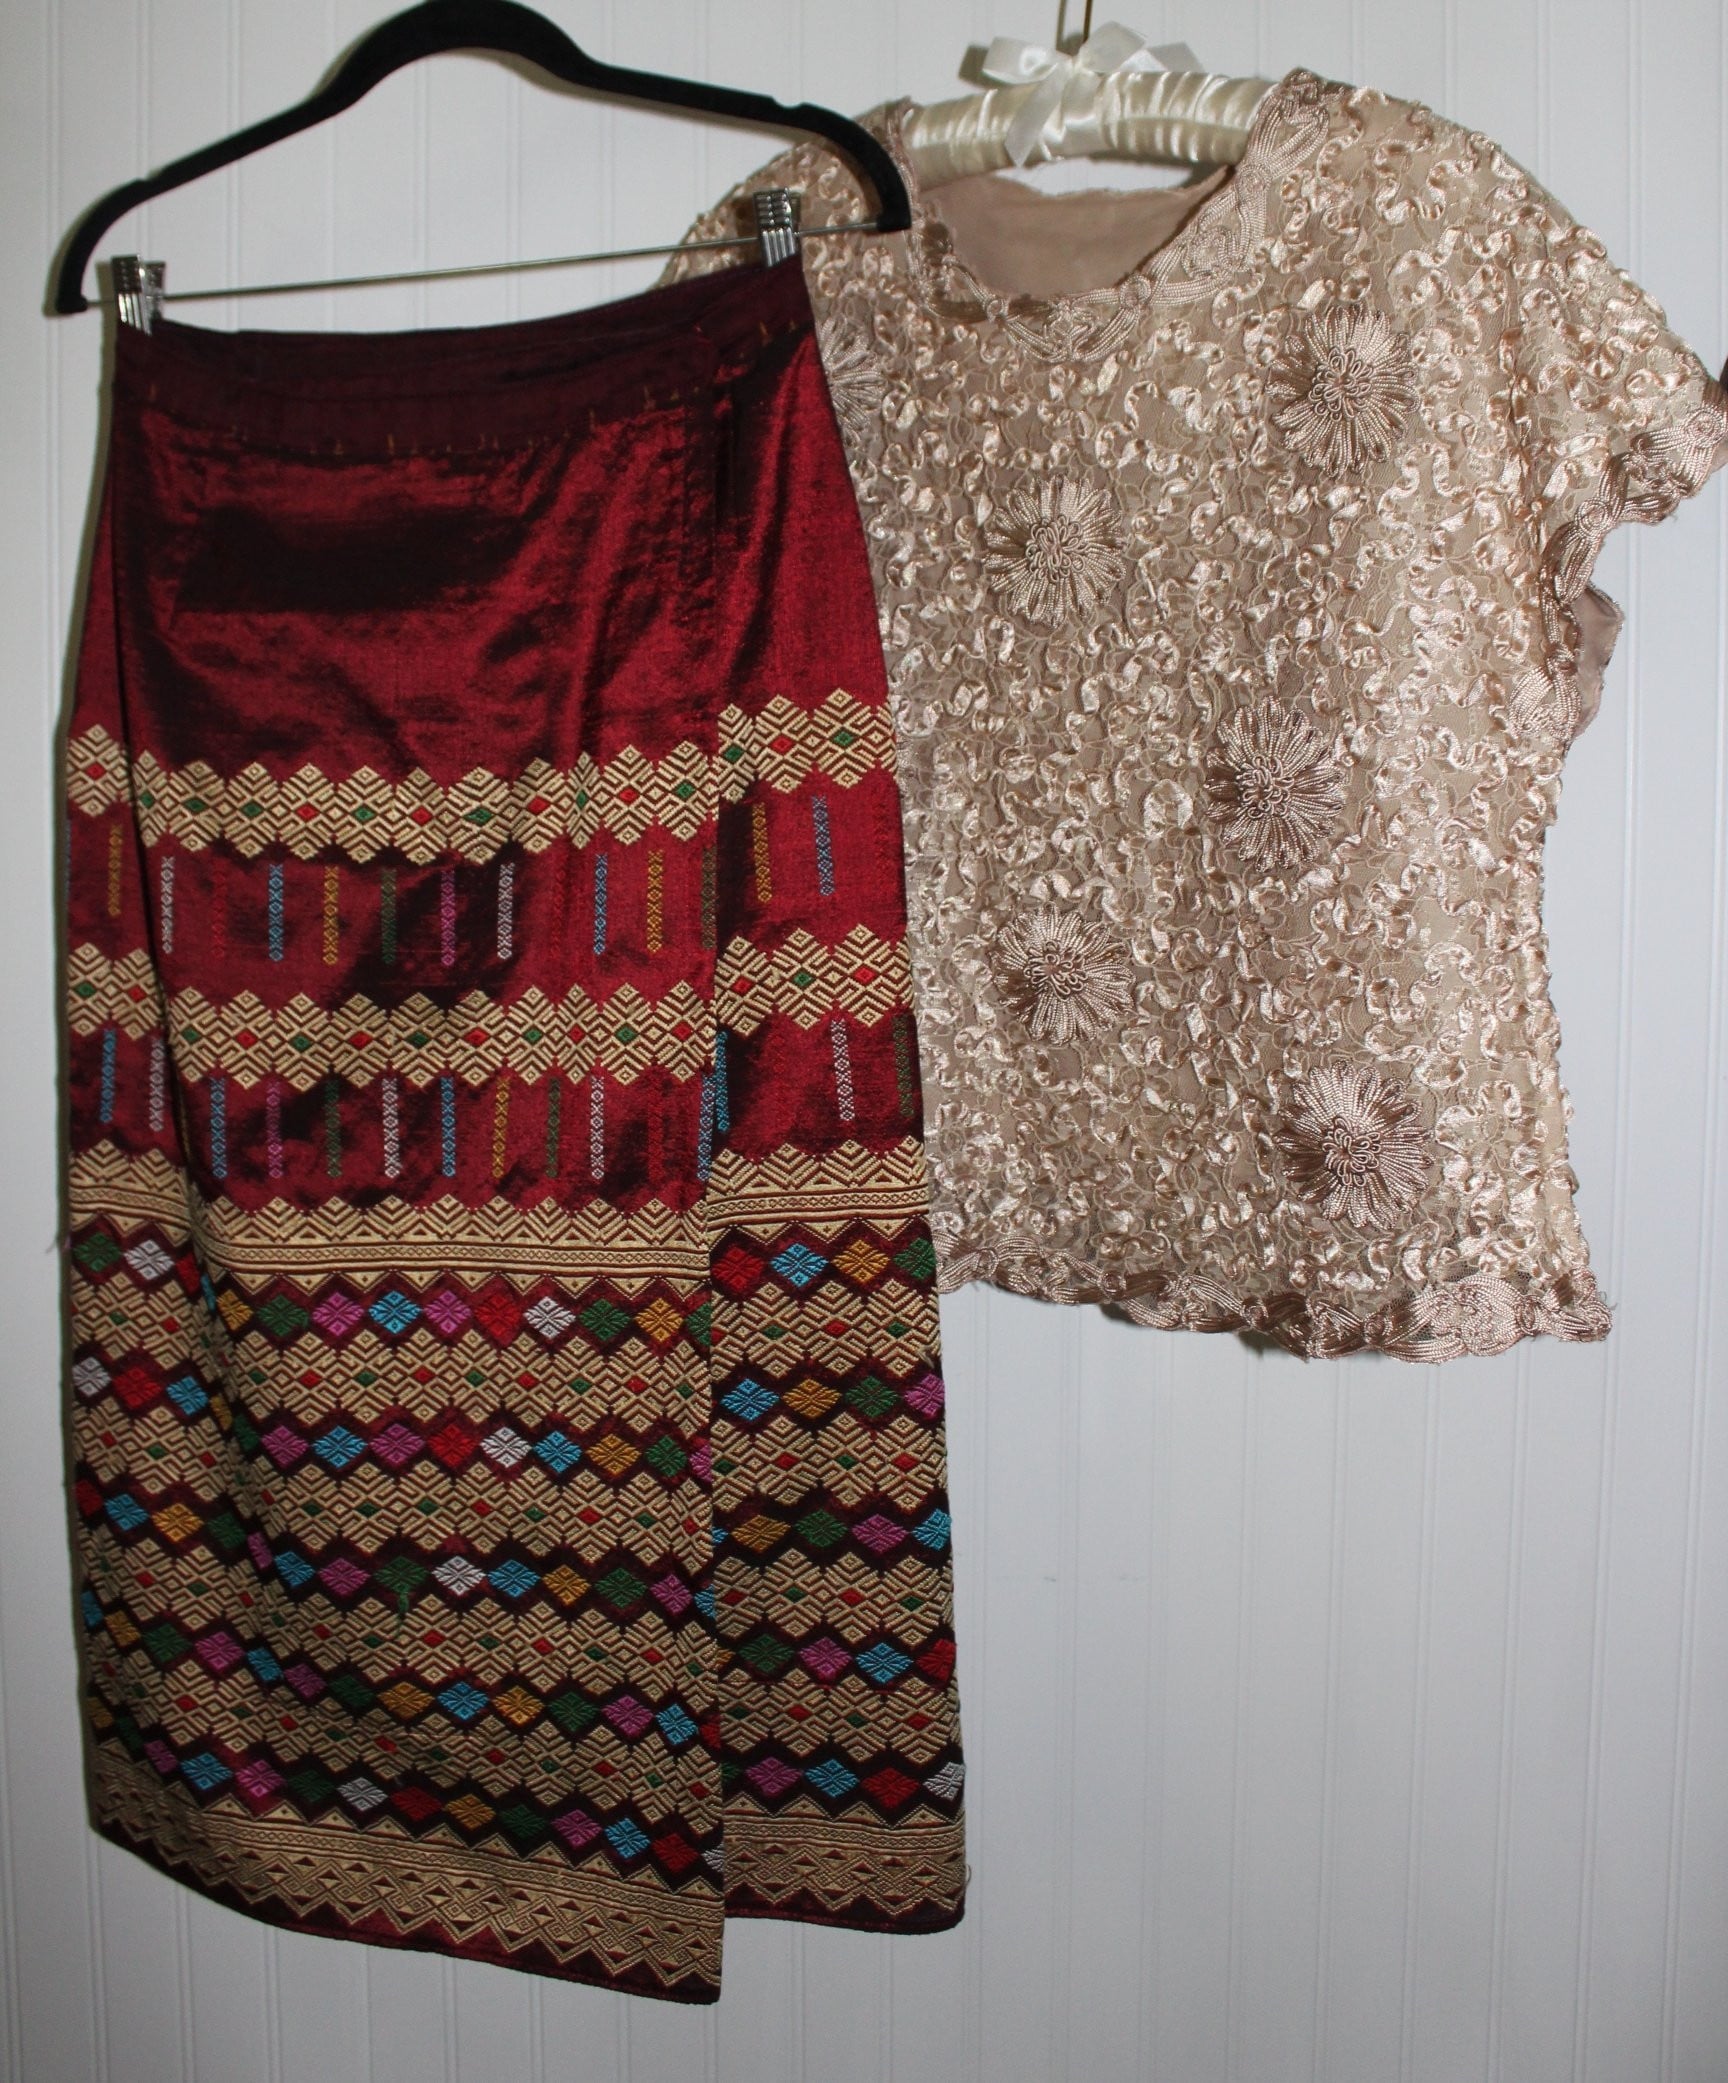 Thailand 2 Piece Wrap Skirt Woven Gold Thread Ribbon Embroidered Top Authenticate Custom Made rare